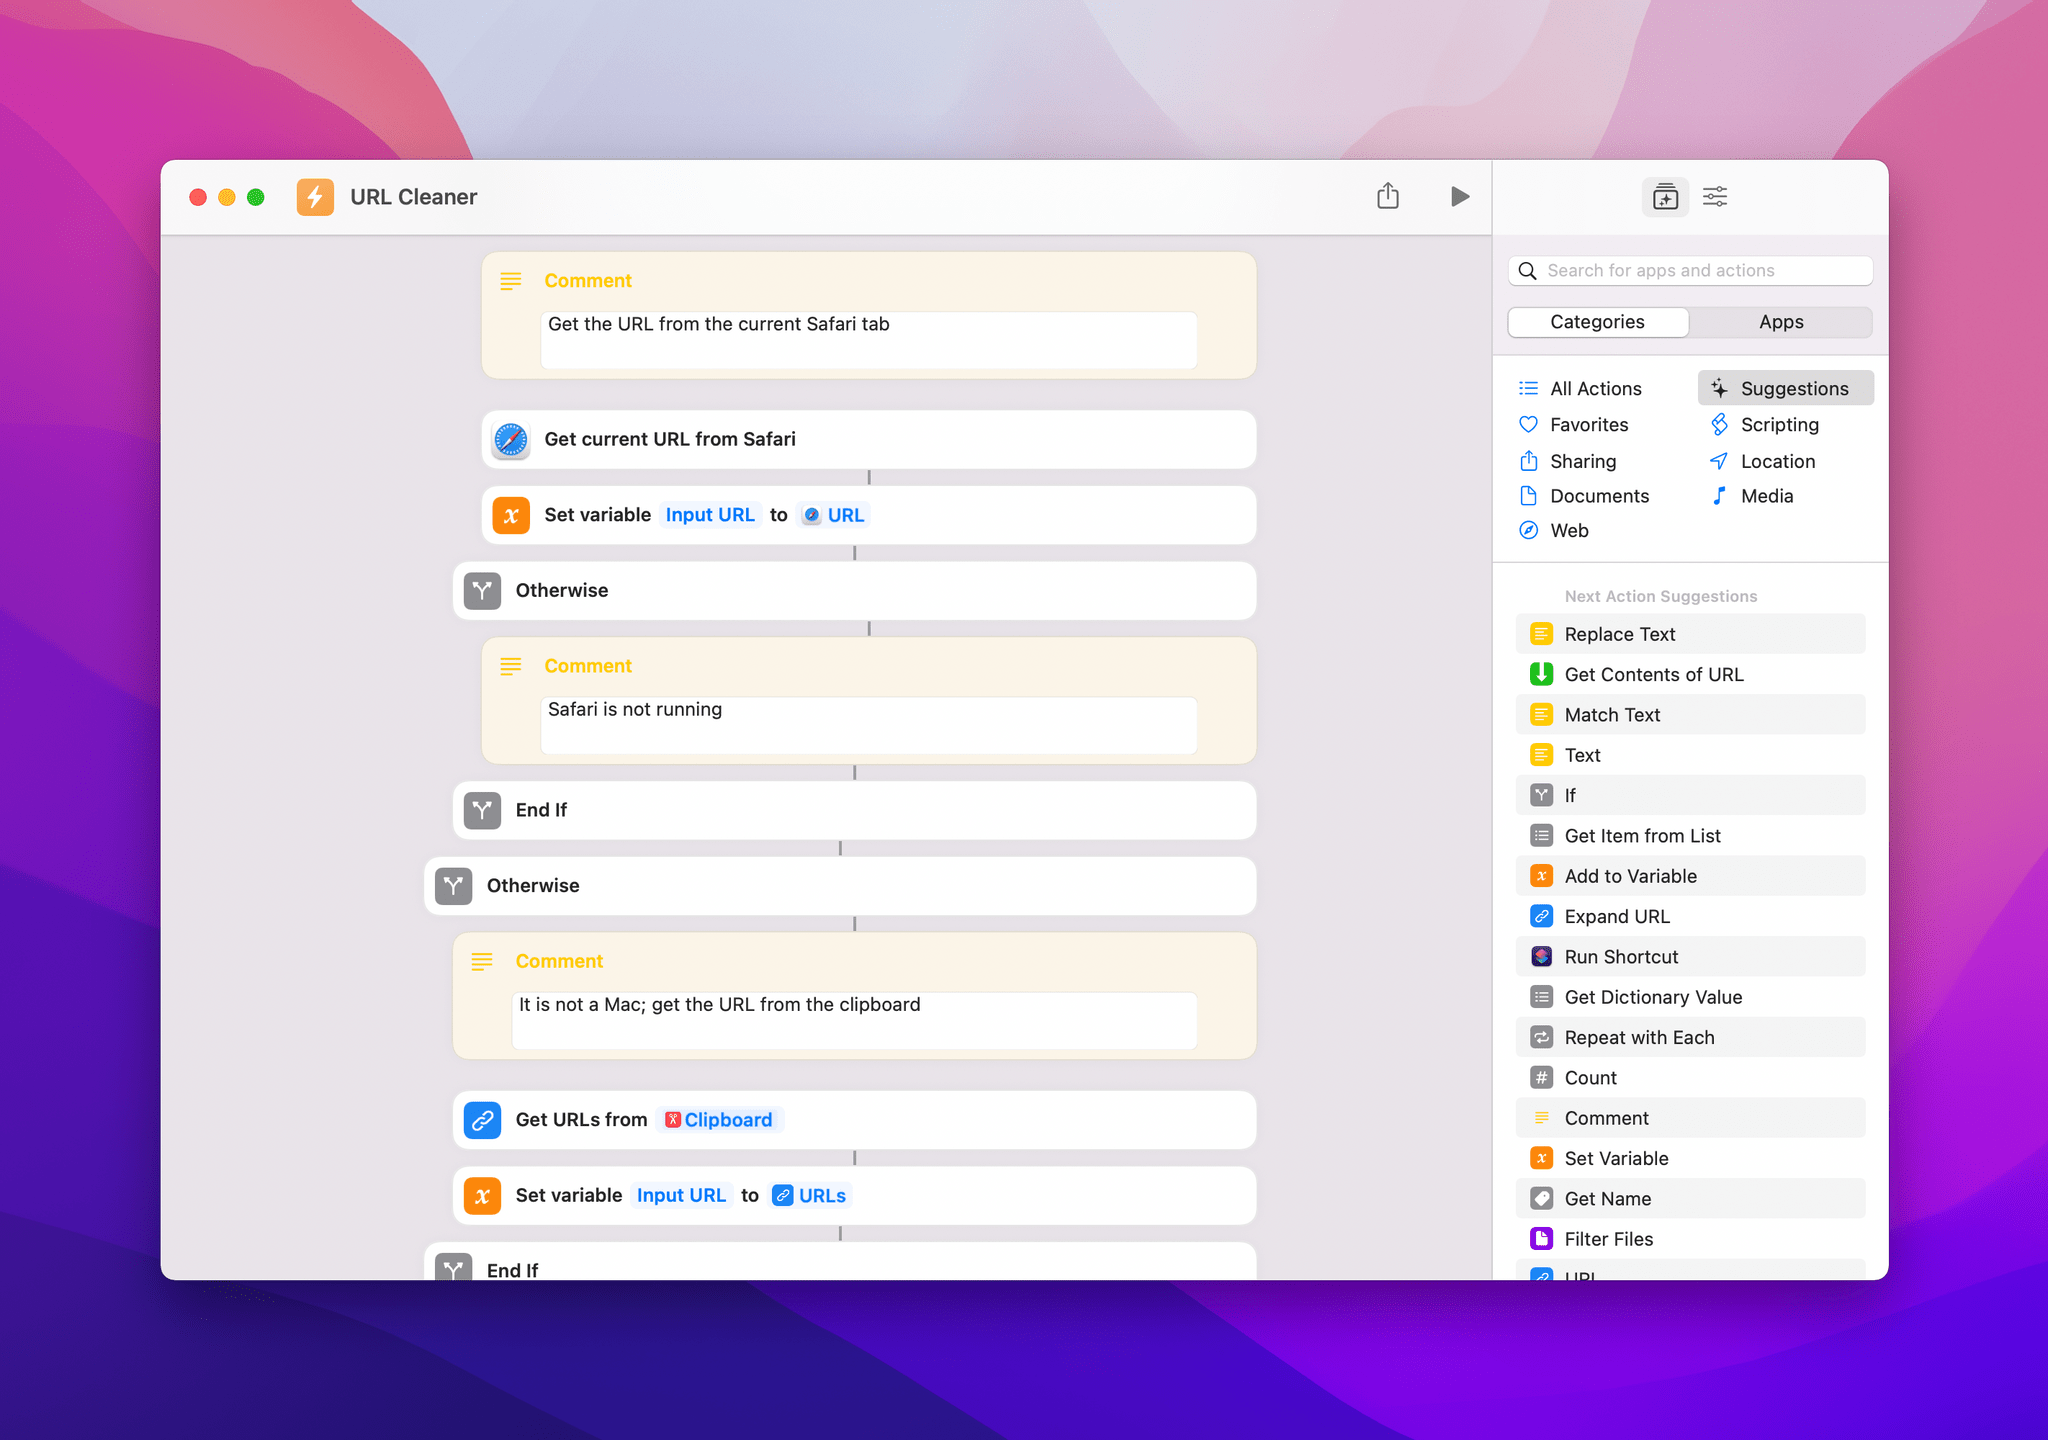 If Safari is running, Shortcuts can use a Monterey-only Safari action.